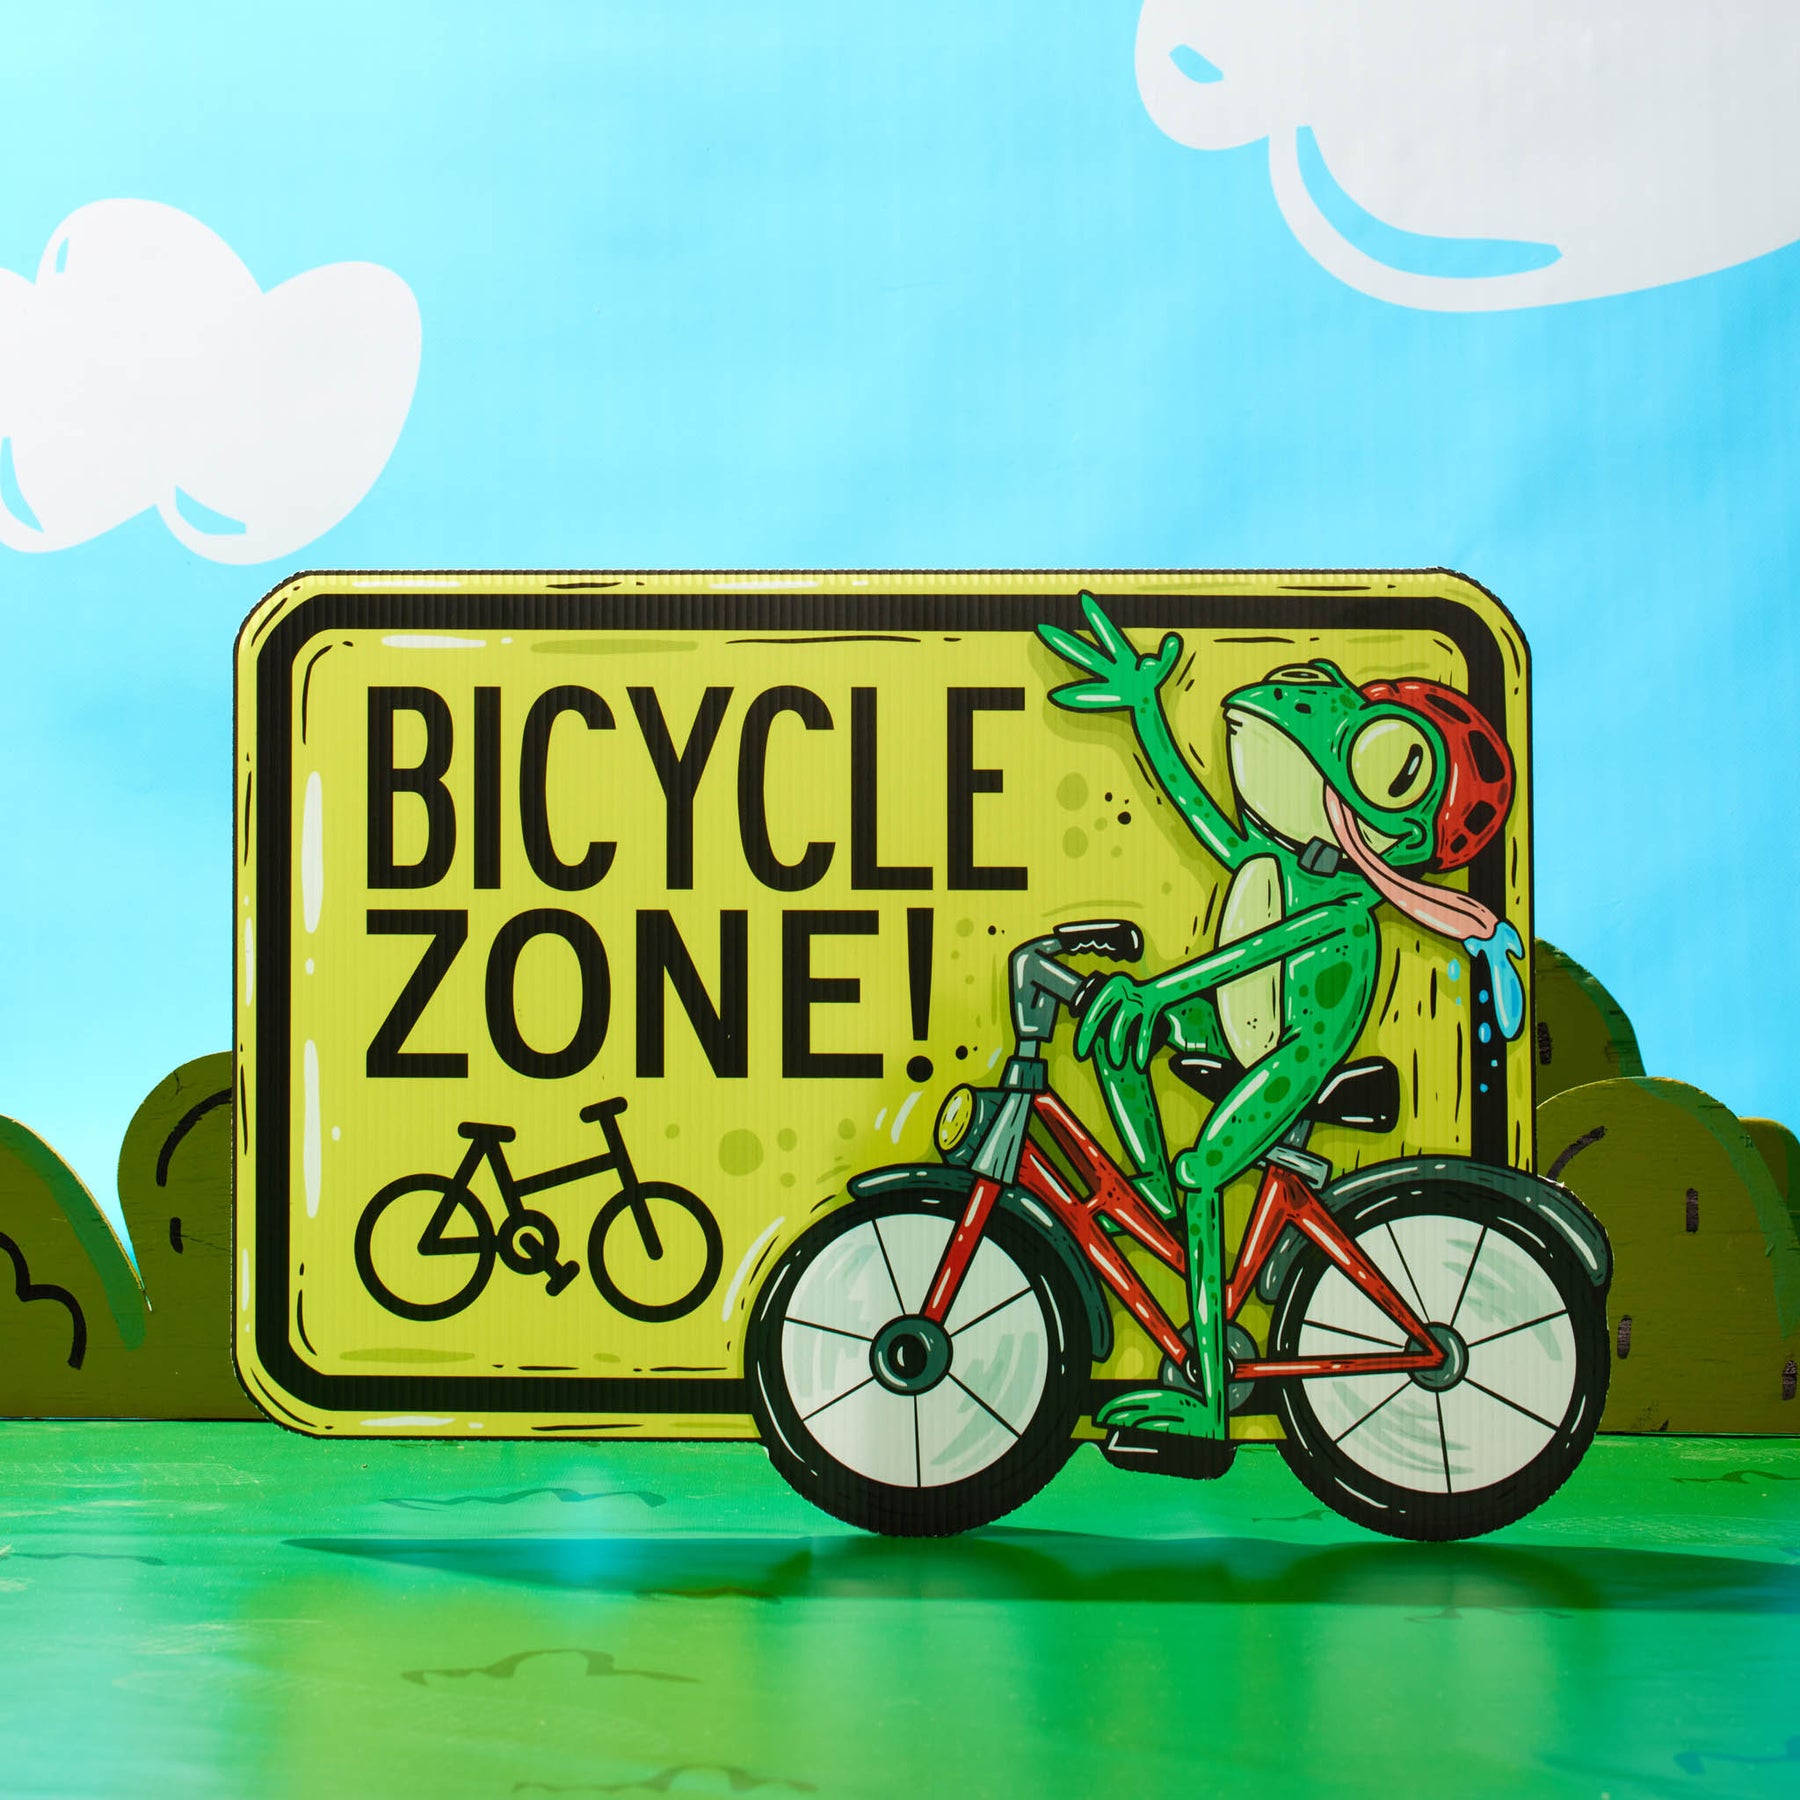 Dr. Thaddeus the Frog | "Bicycle Zone" Yard Sign